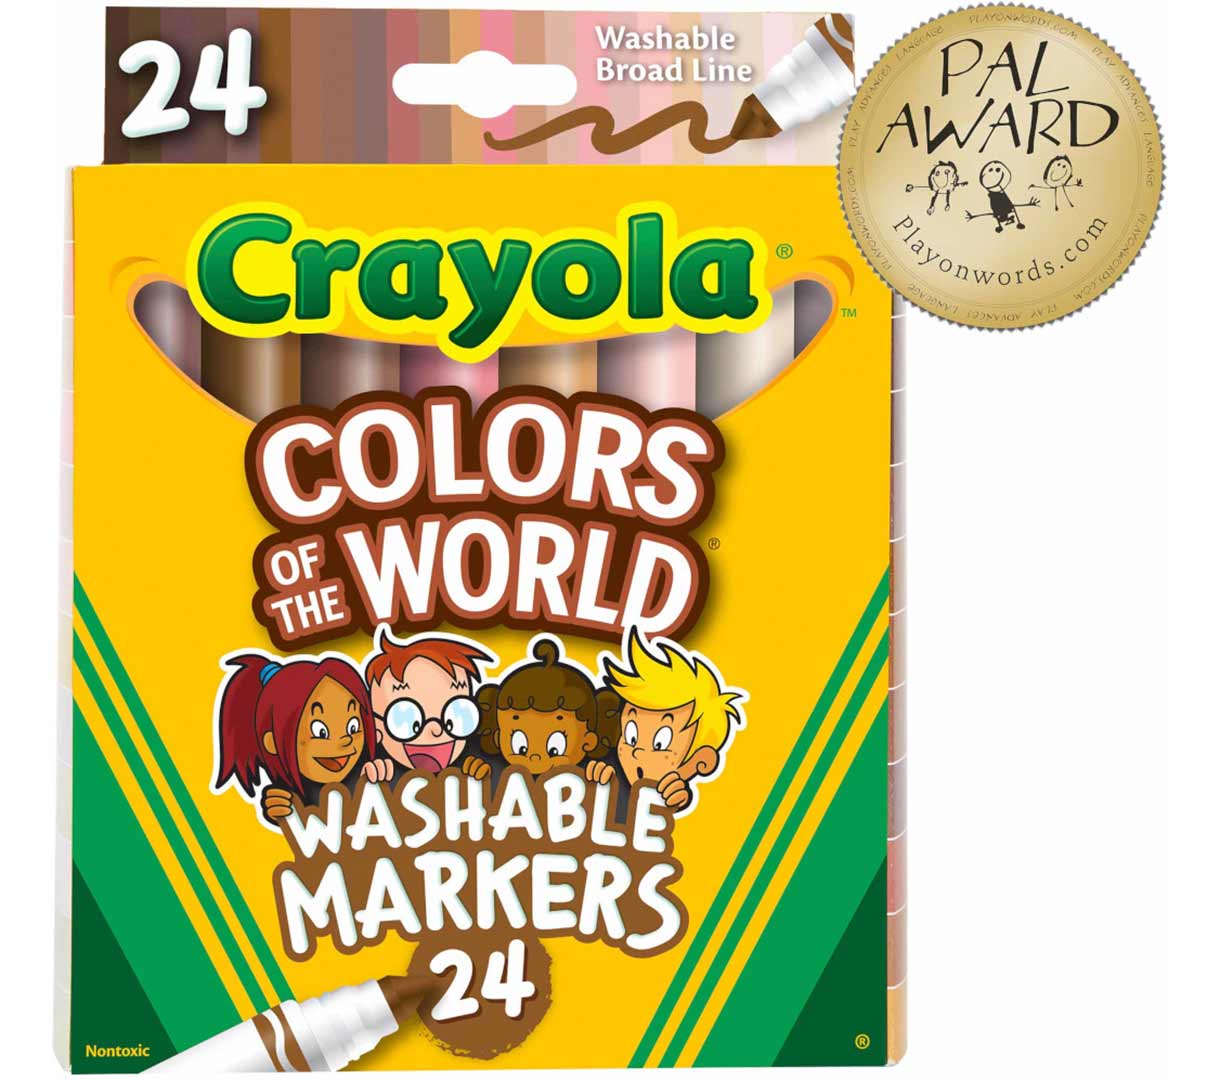 Brand New Crayola Super Tips Washable Markers Pack 100 Assorted